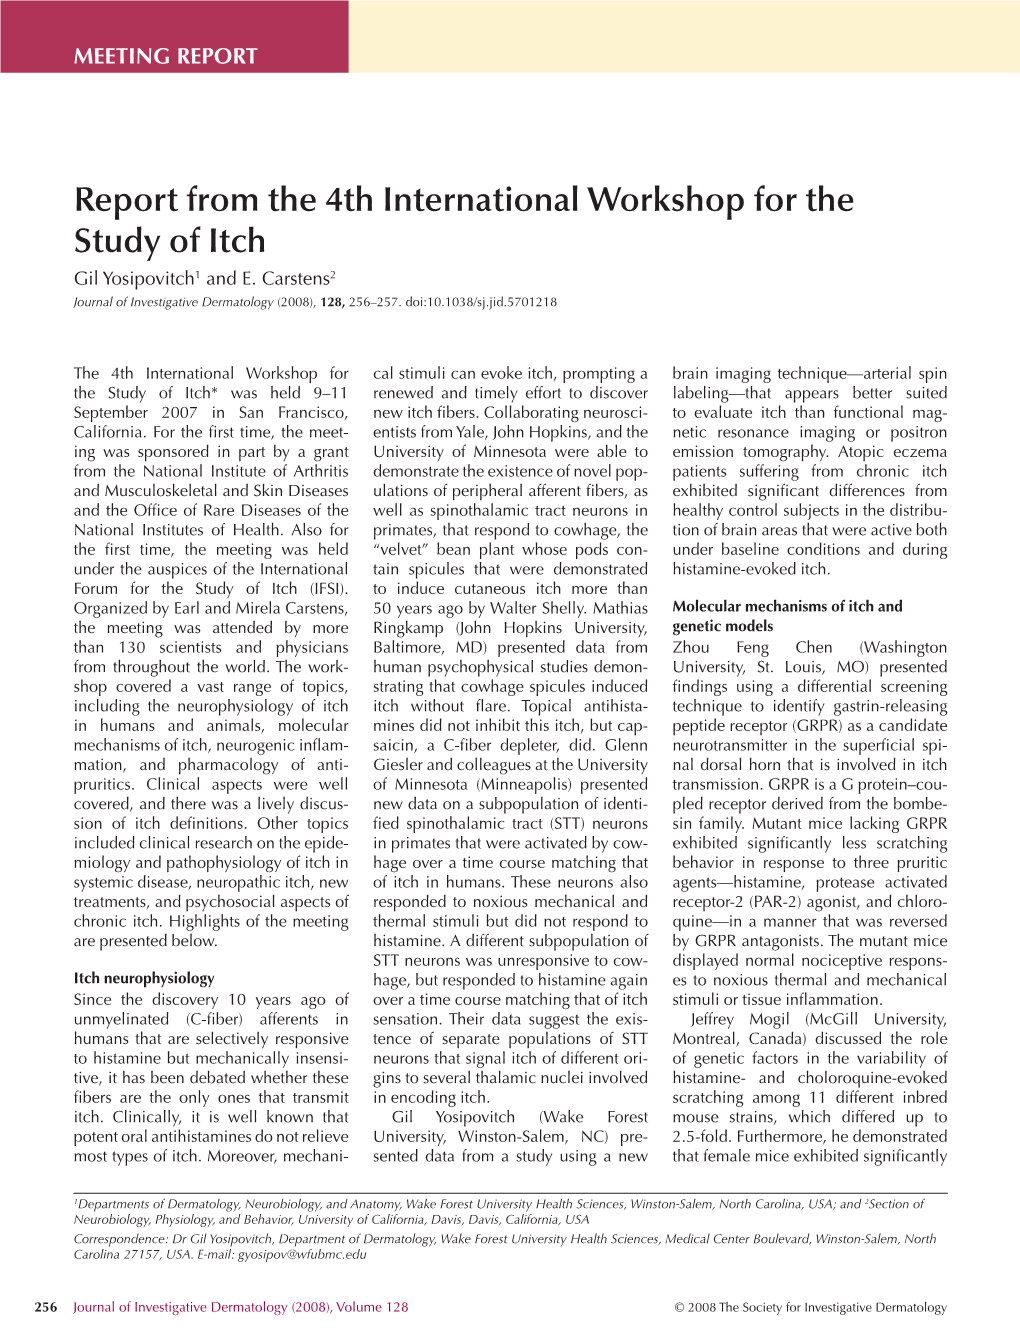 Report from the 4Th International Workshop for the Study of Itch Gil Yosipovitch1 and E